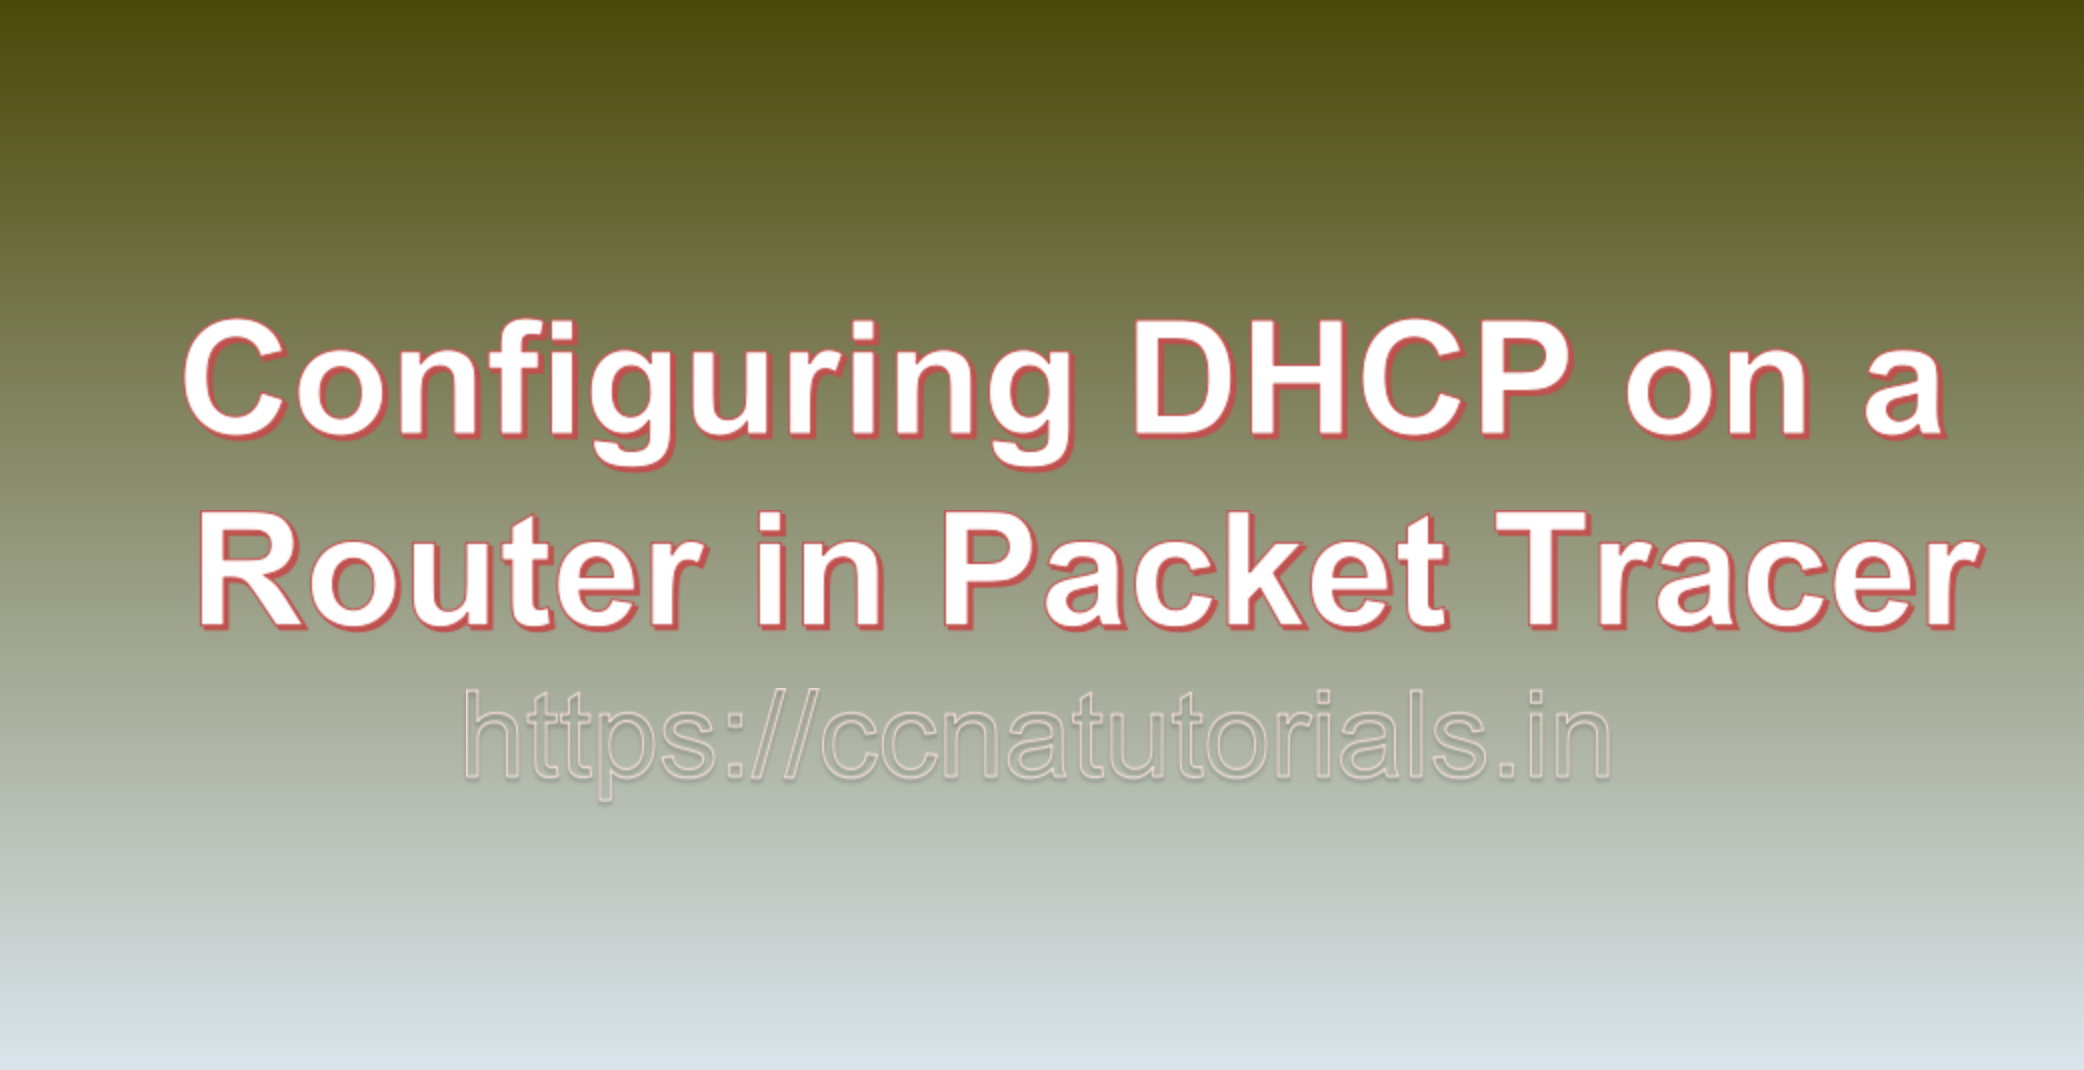 Configuring DHCP on a router in Packet Tracer is a valuable skill for network administrators and engineers. It streamlines IP address management, reduces, ccna, ccna tutorials